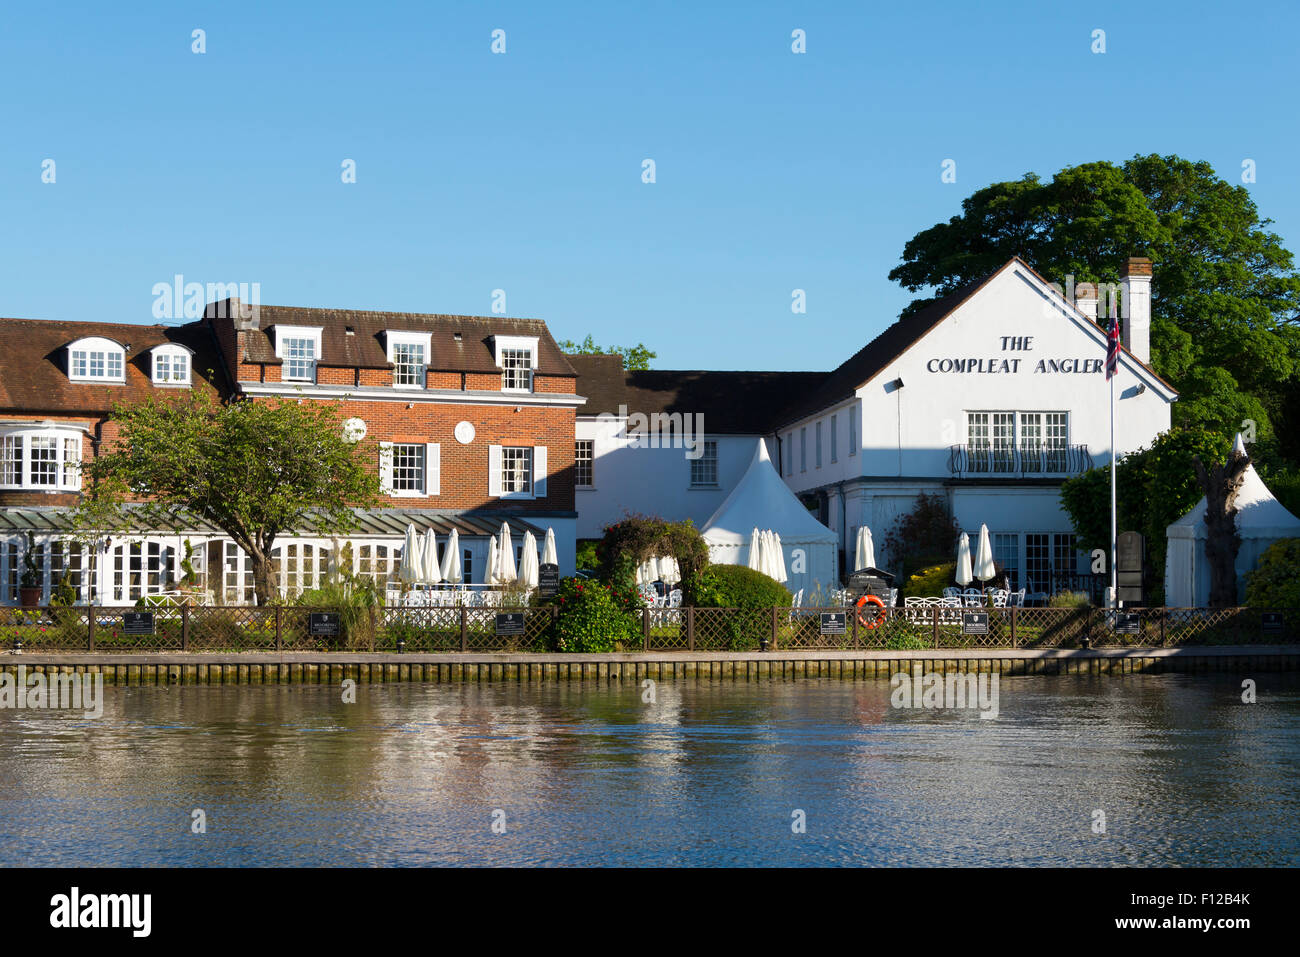 Le Compleat Angler, Marlow, Buckinghamshire, Angleterre, Royaume-Uni. Banque D'Images